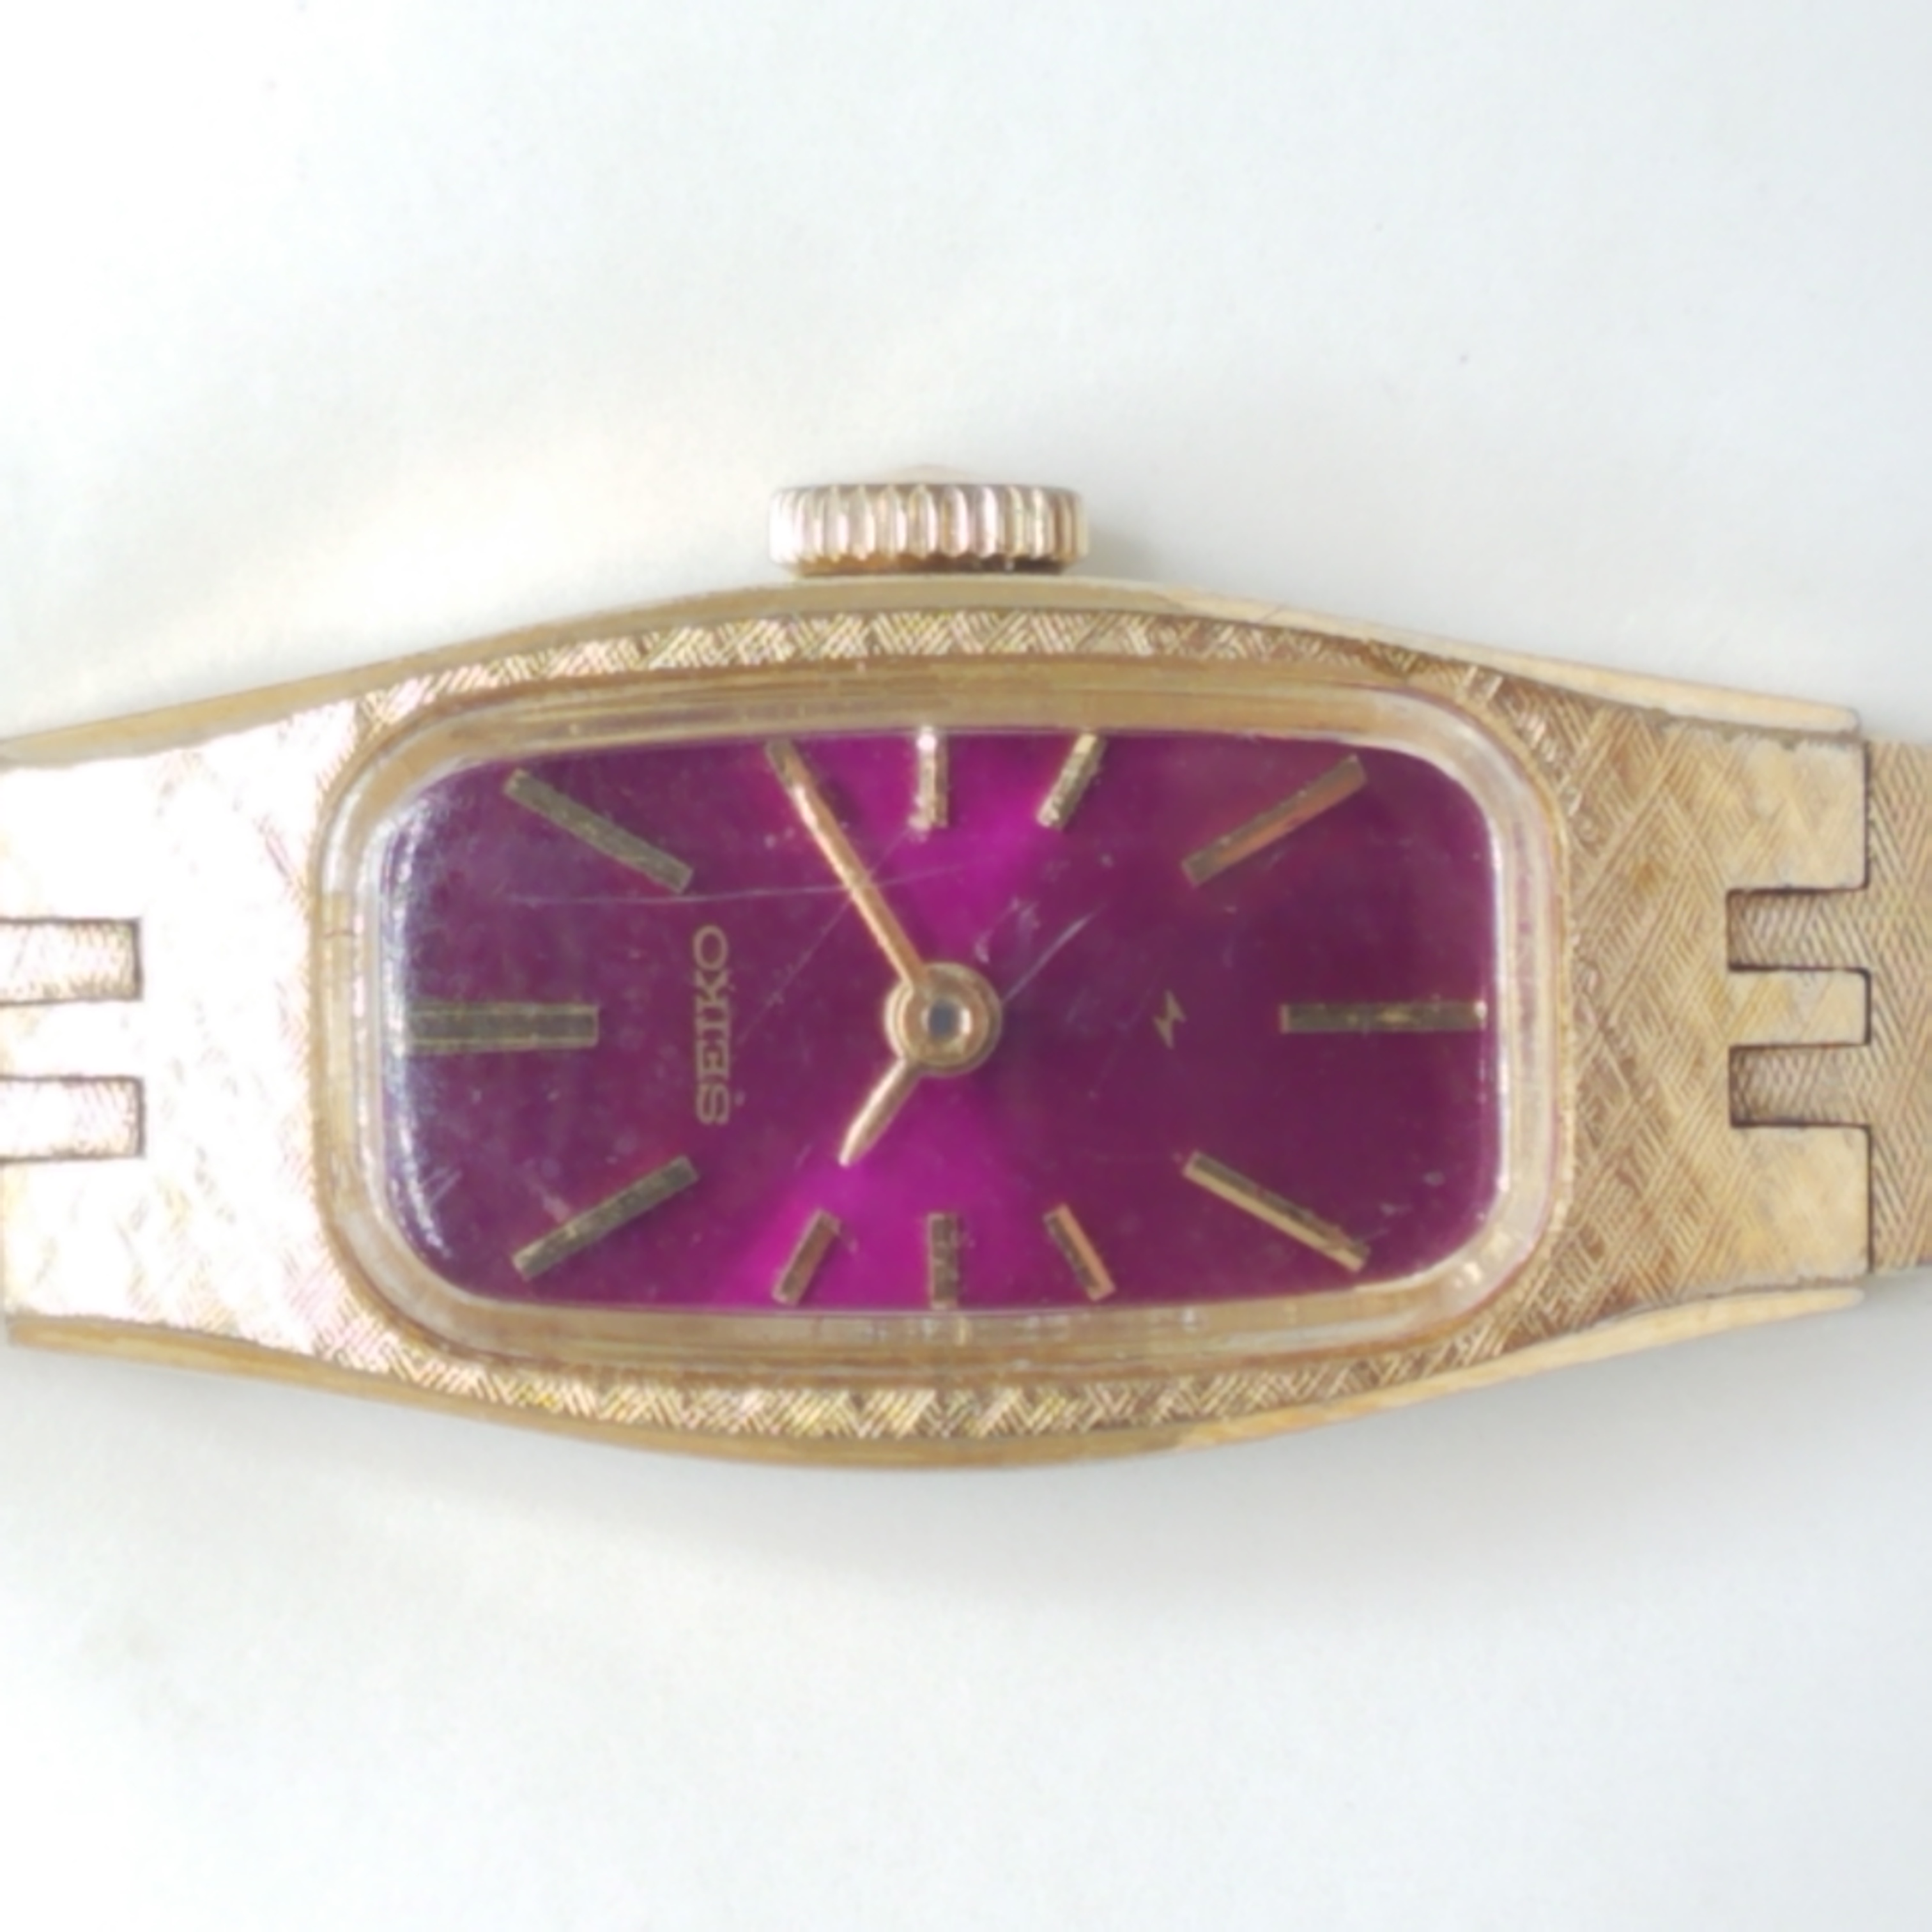 Buy the Very Rare Seiko 1520-3629 Pink Dial With Gold Tone Vintage Cocktail  Watch | GoodwillFinds